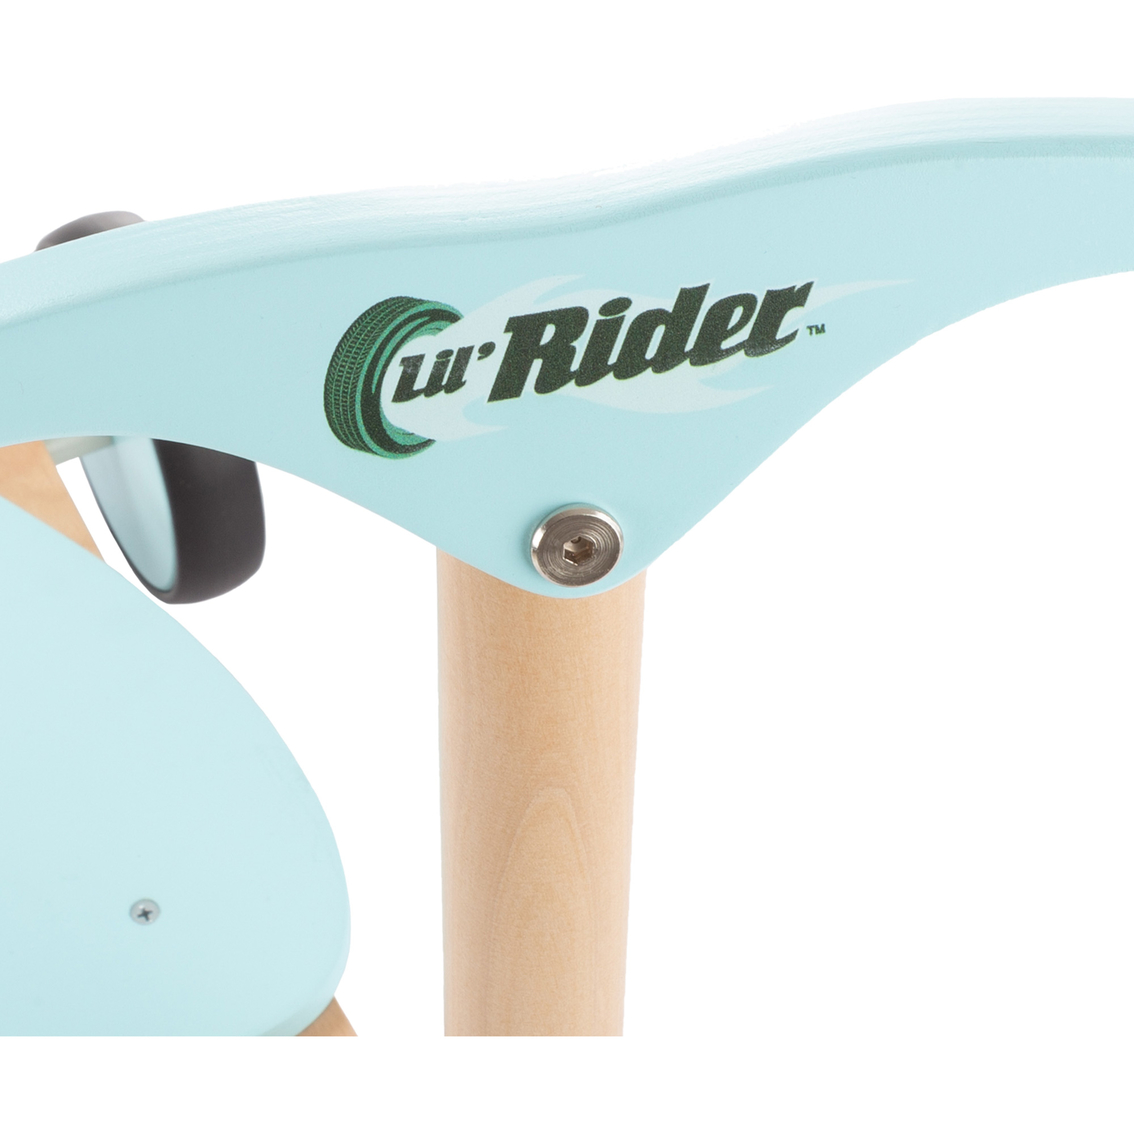 Lil' Rider Wooden Kick Scooter - Image 3 of 6